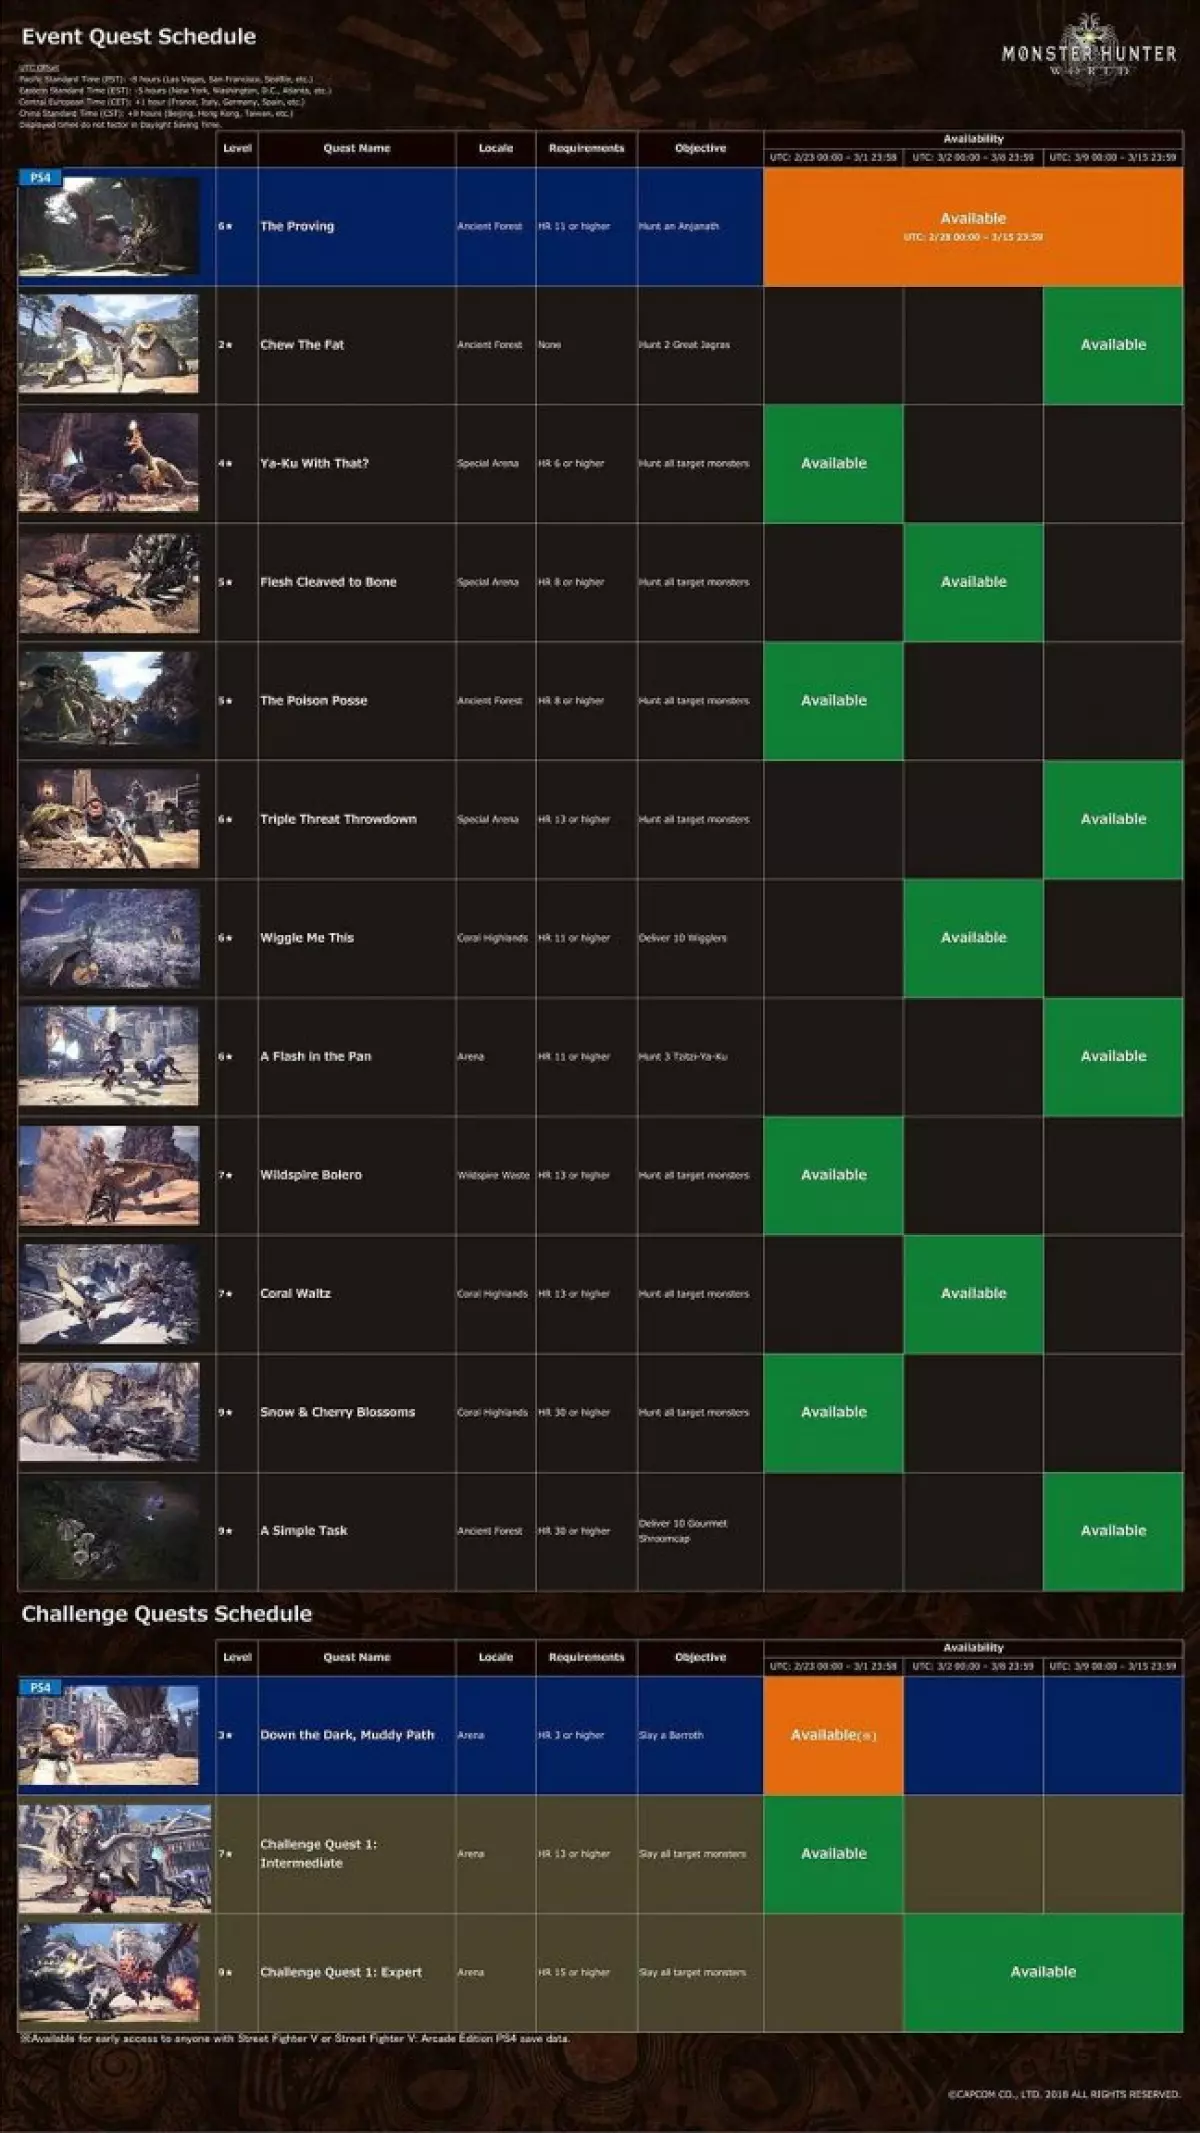 Monster Hunter World here's the current Event Quest Schedule for March